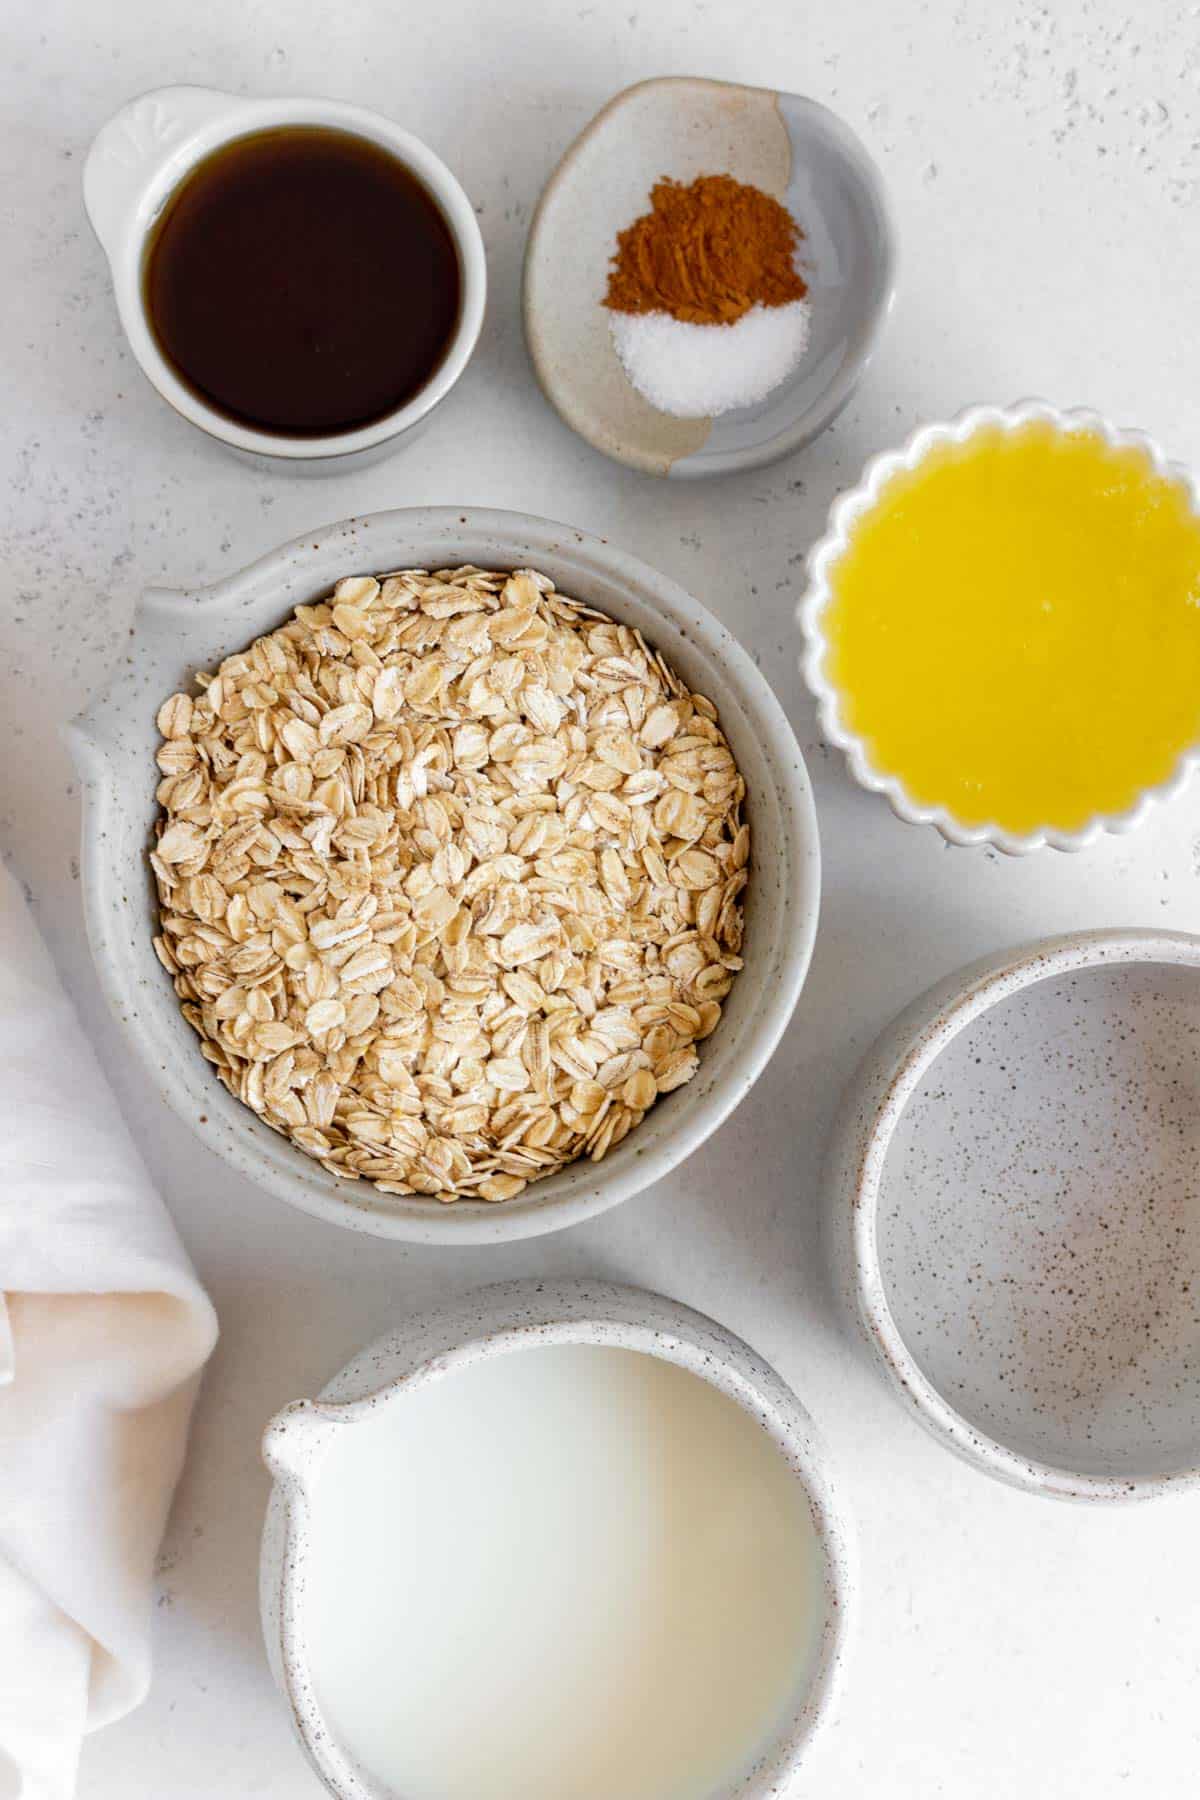 Ingredients needed to make egg white oatmeal.